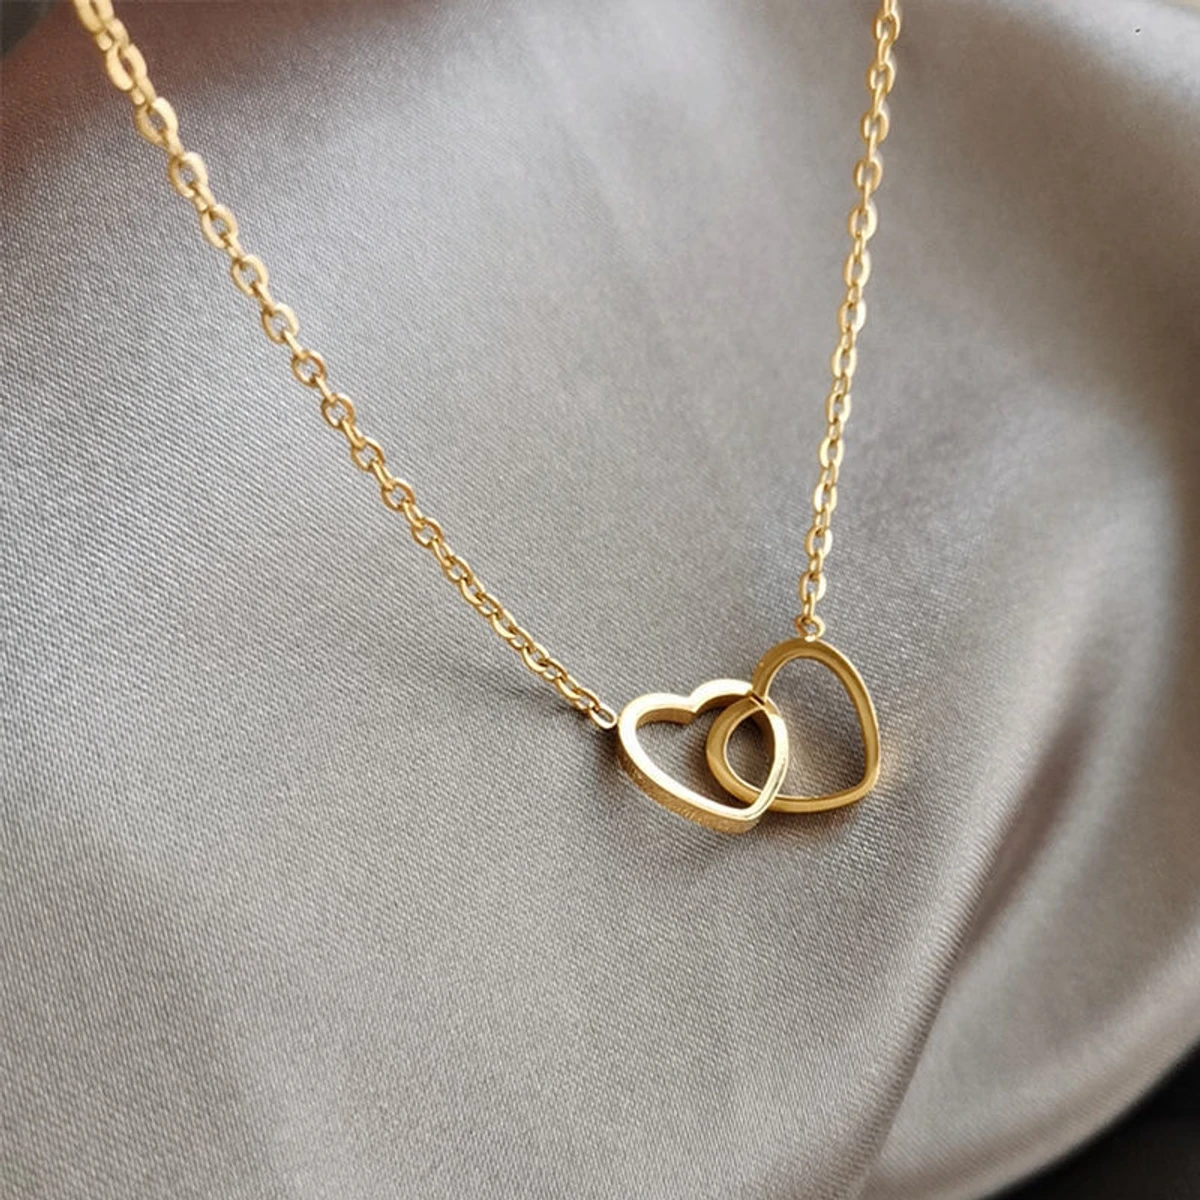 Fashionable Double Hart Necklaces for Women